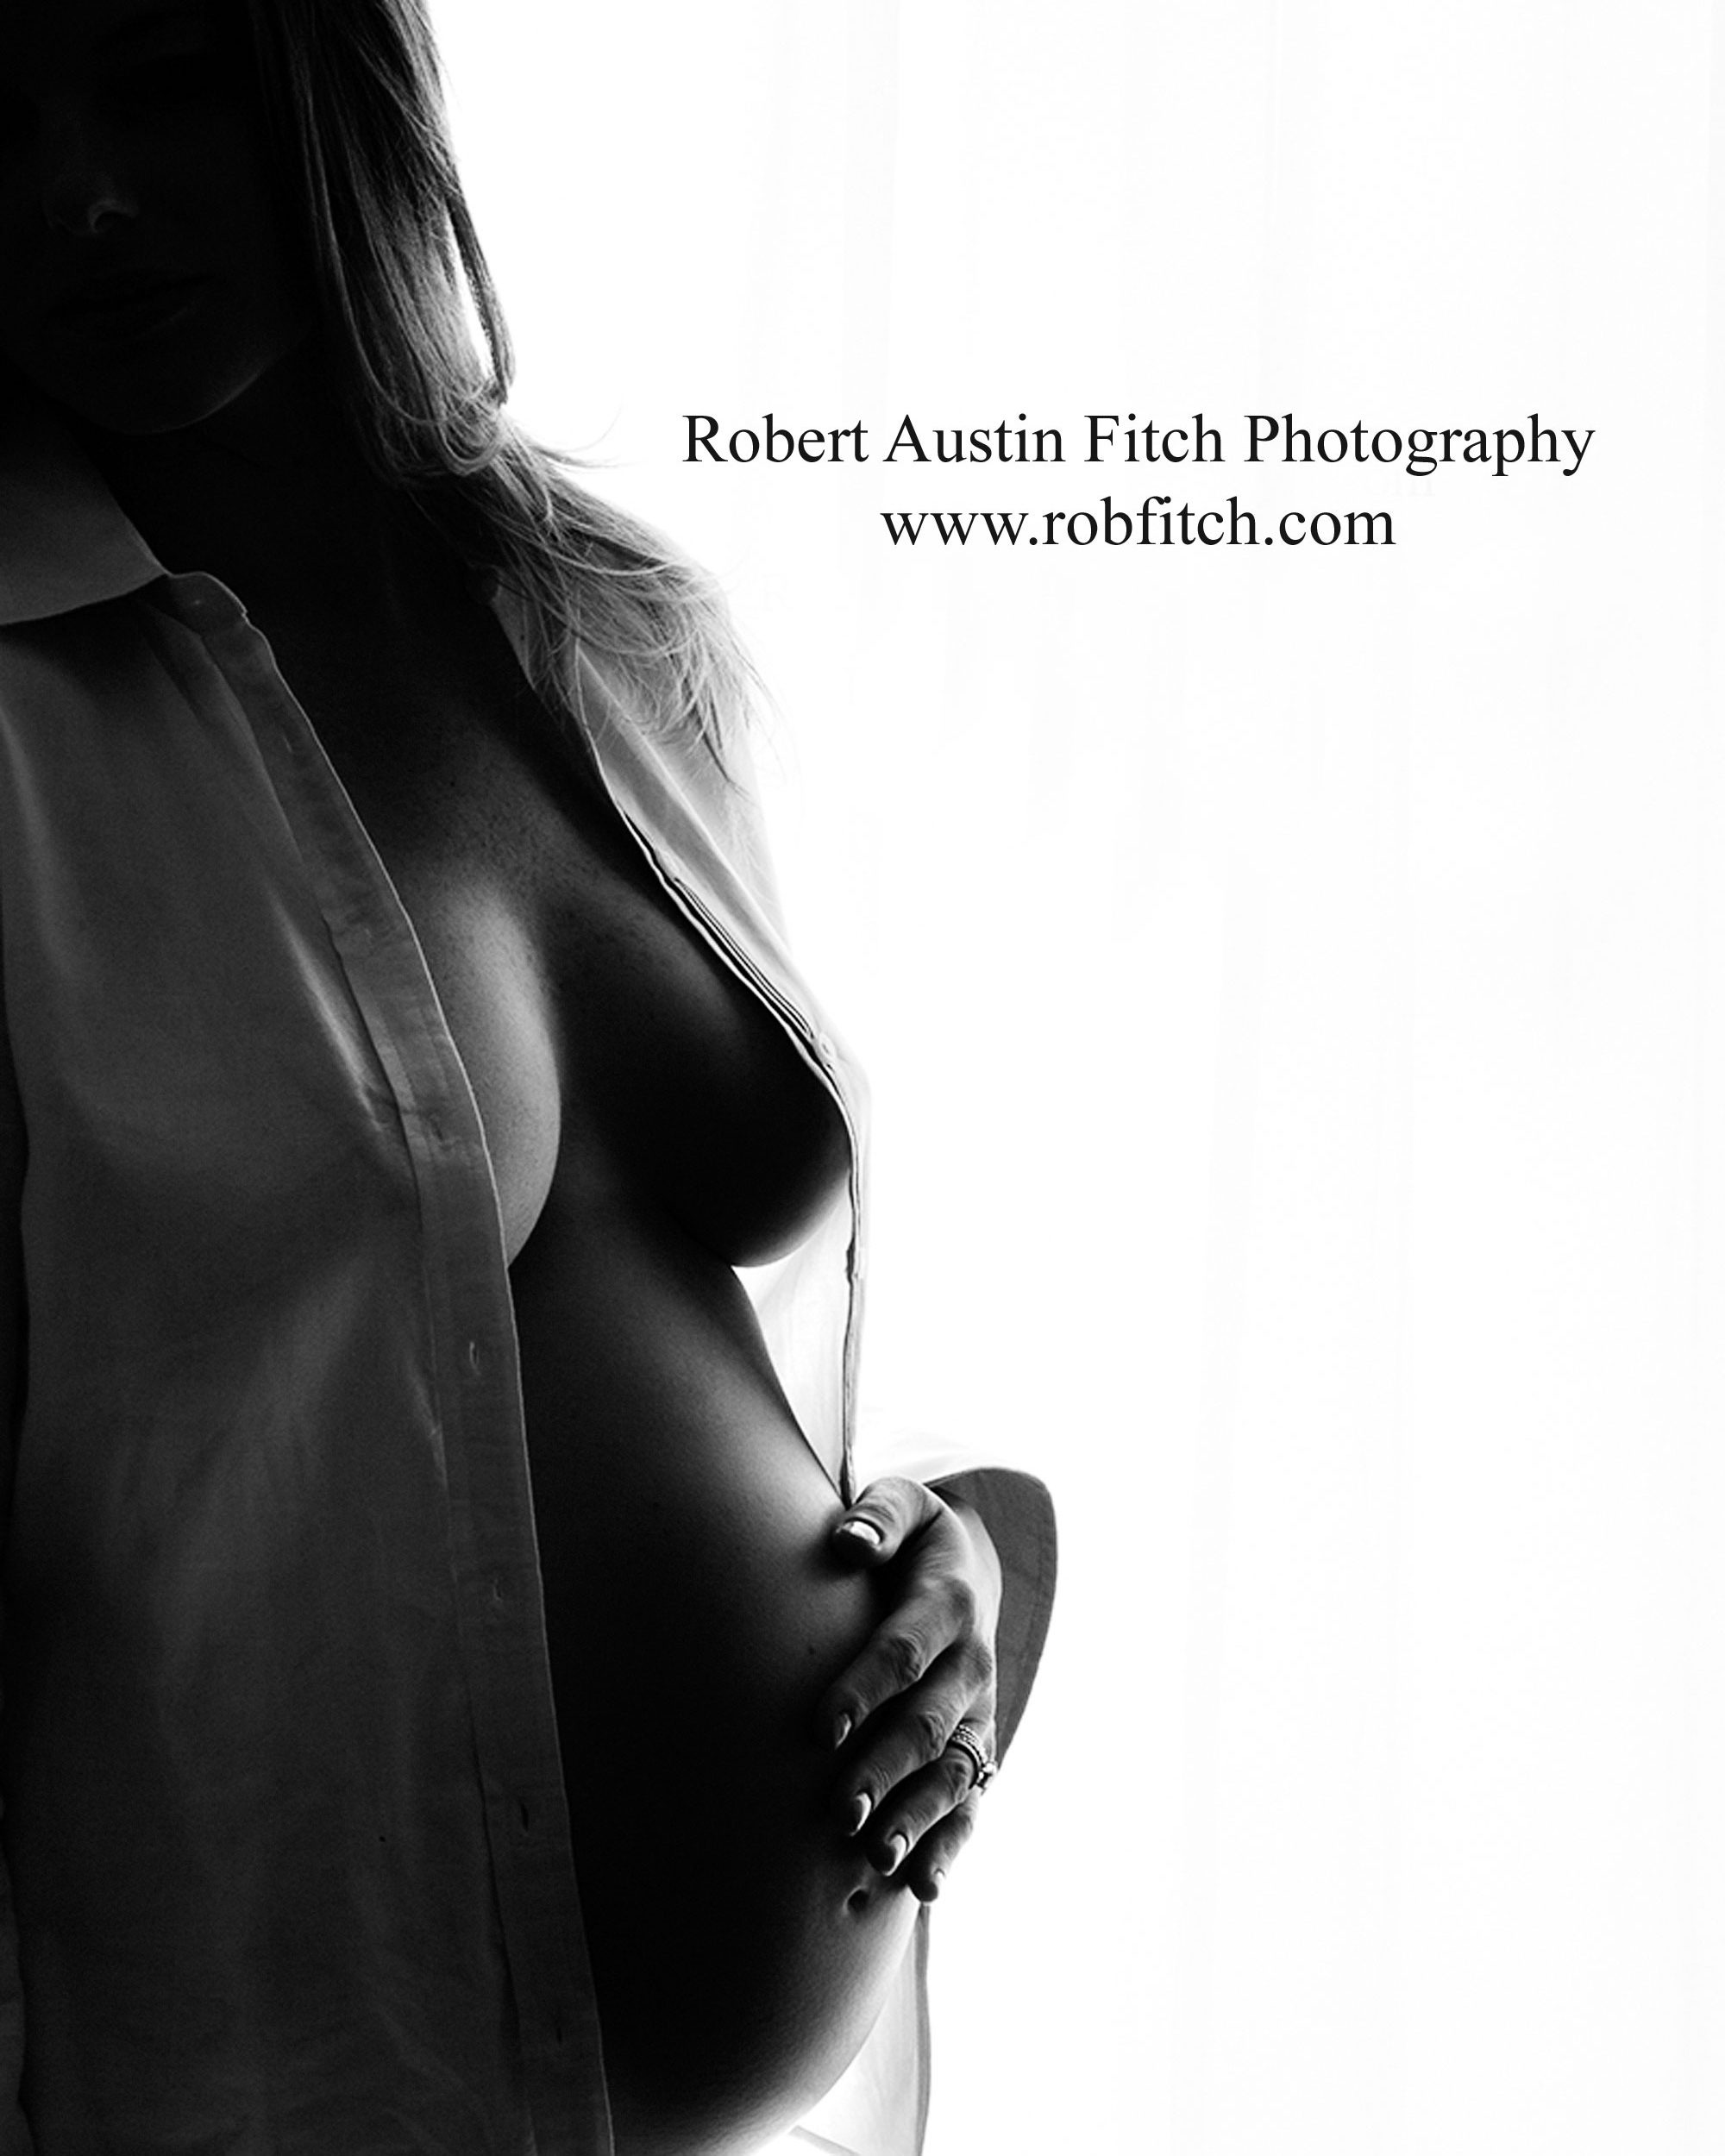 Stunning black and white silhouette maternity photo